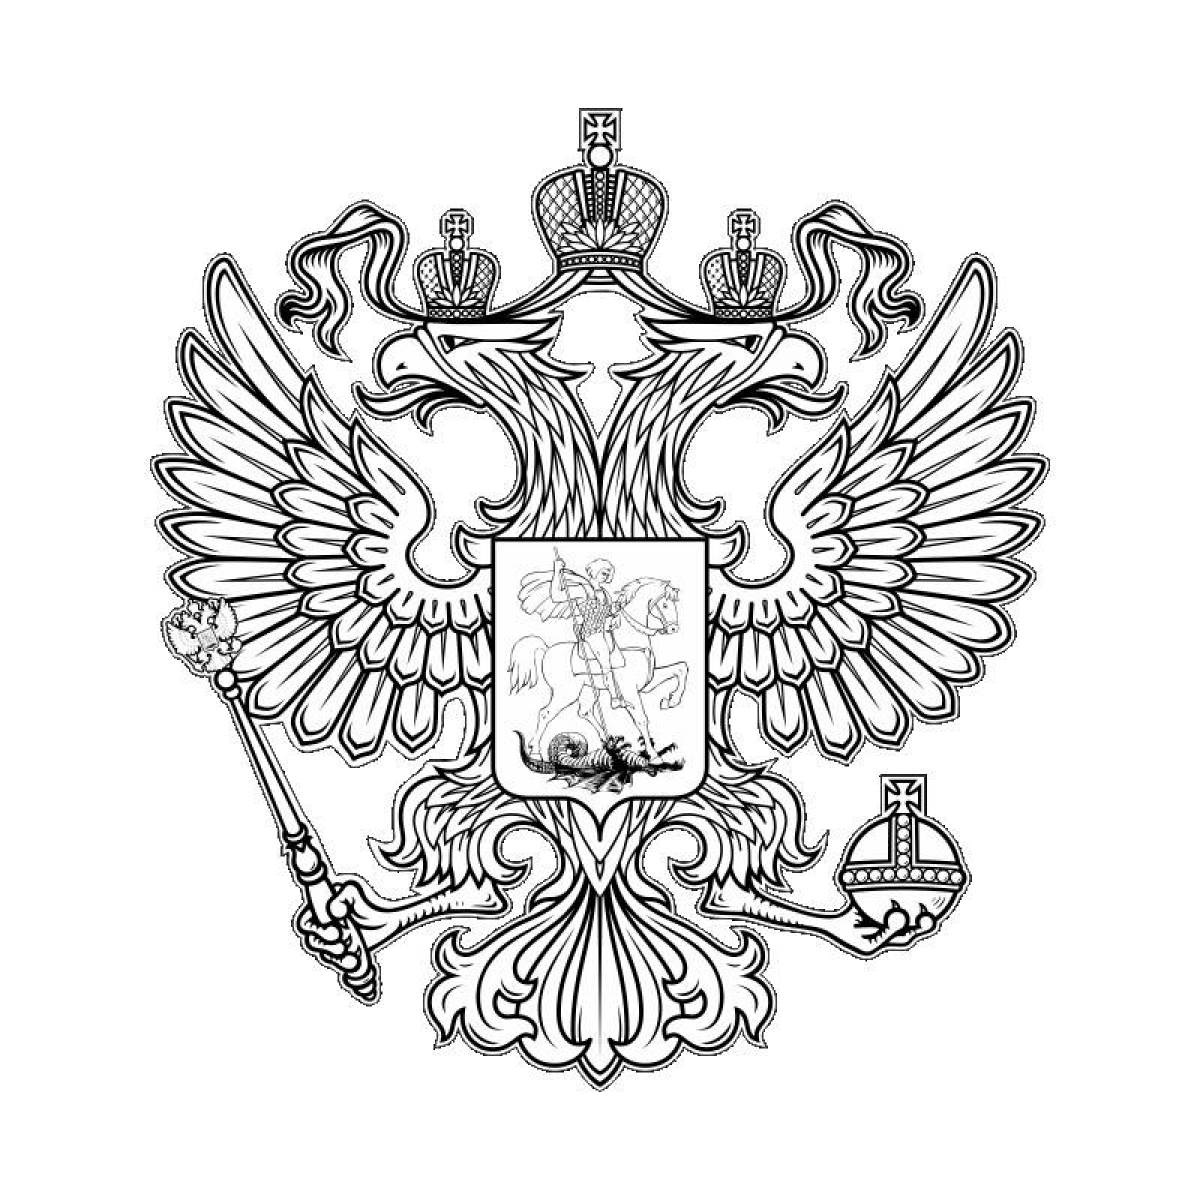 Russian coat of arms #4